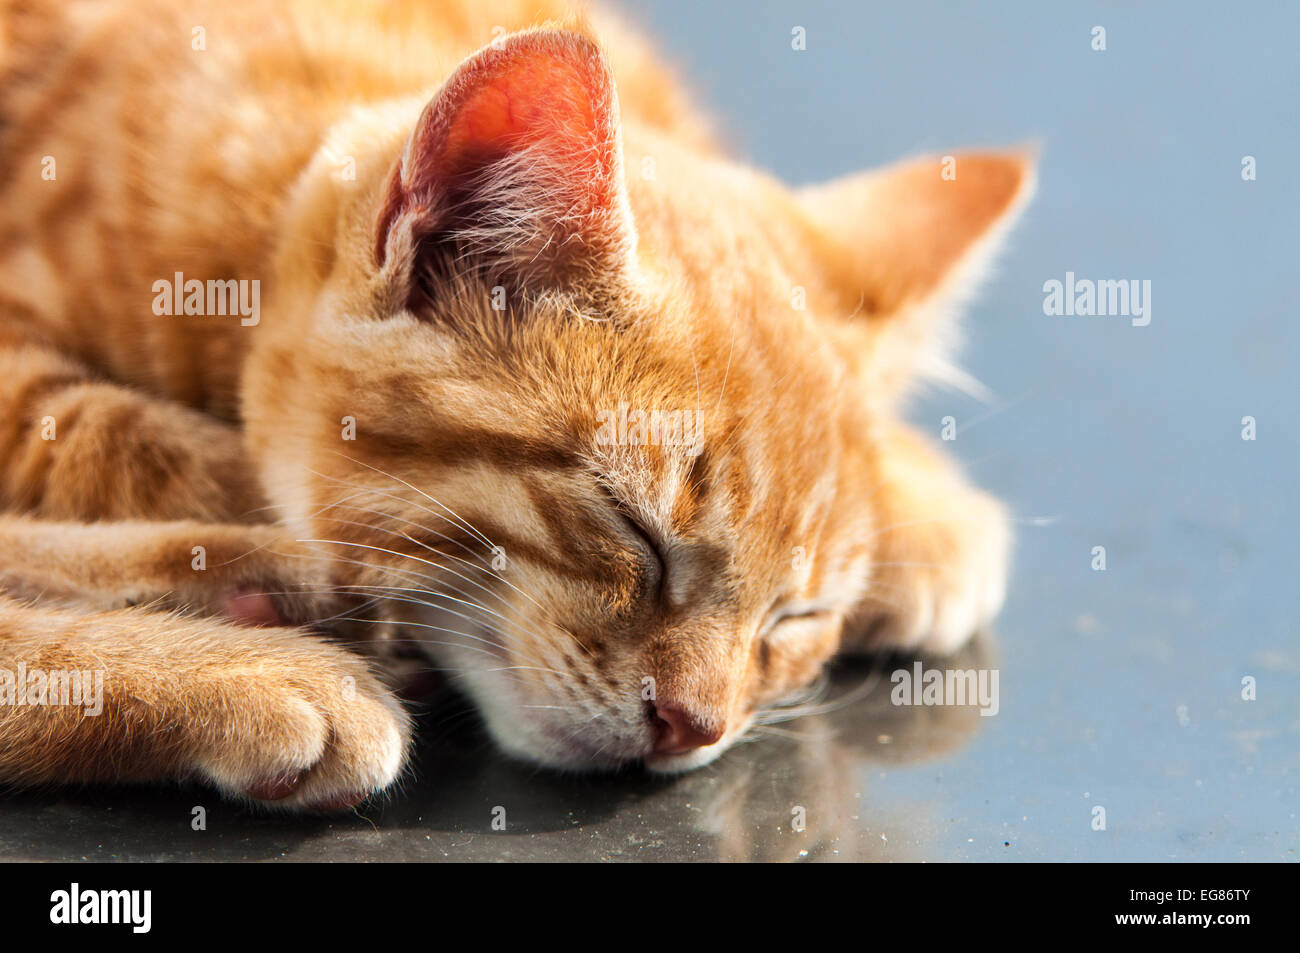 Ginger cat asleep, close-up of head and front paws Stock Photo